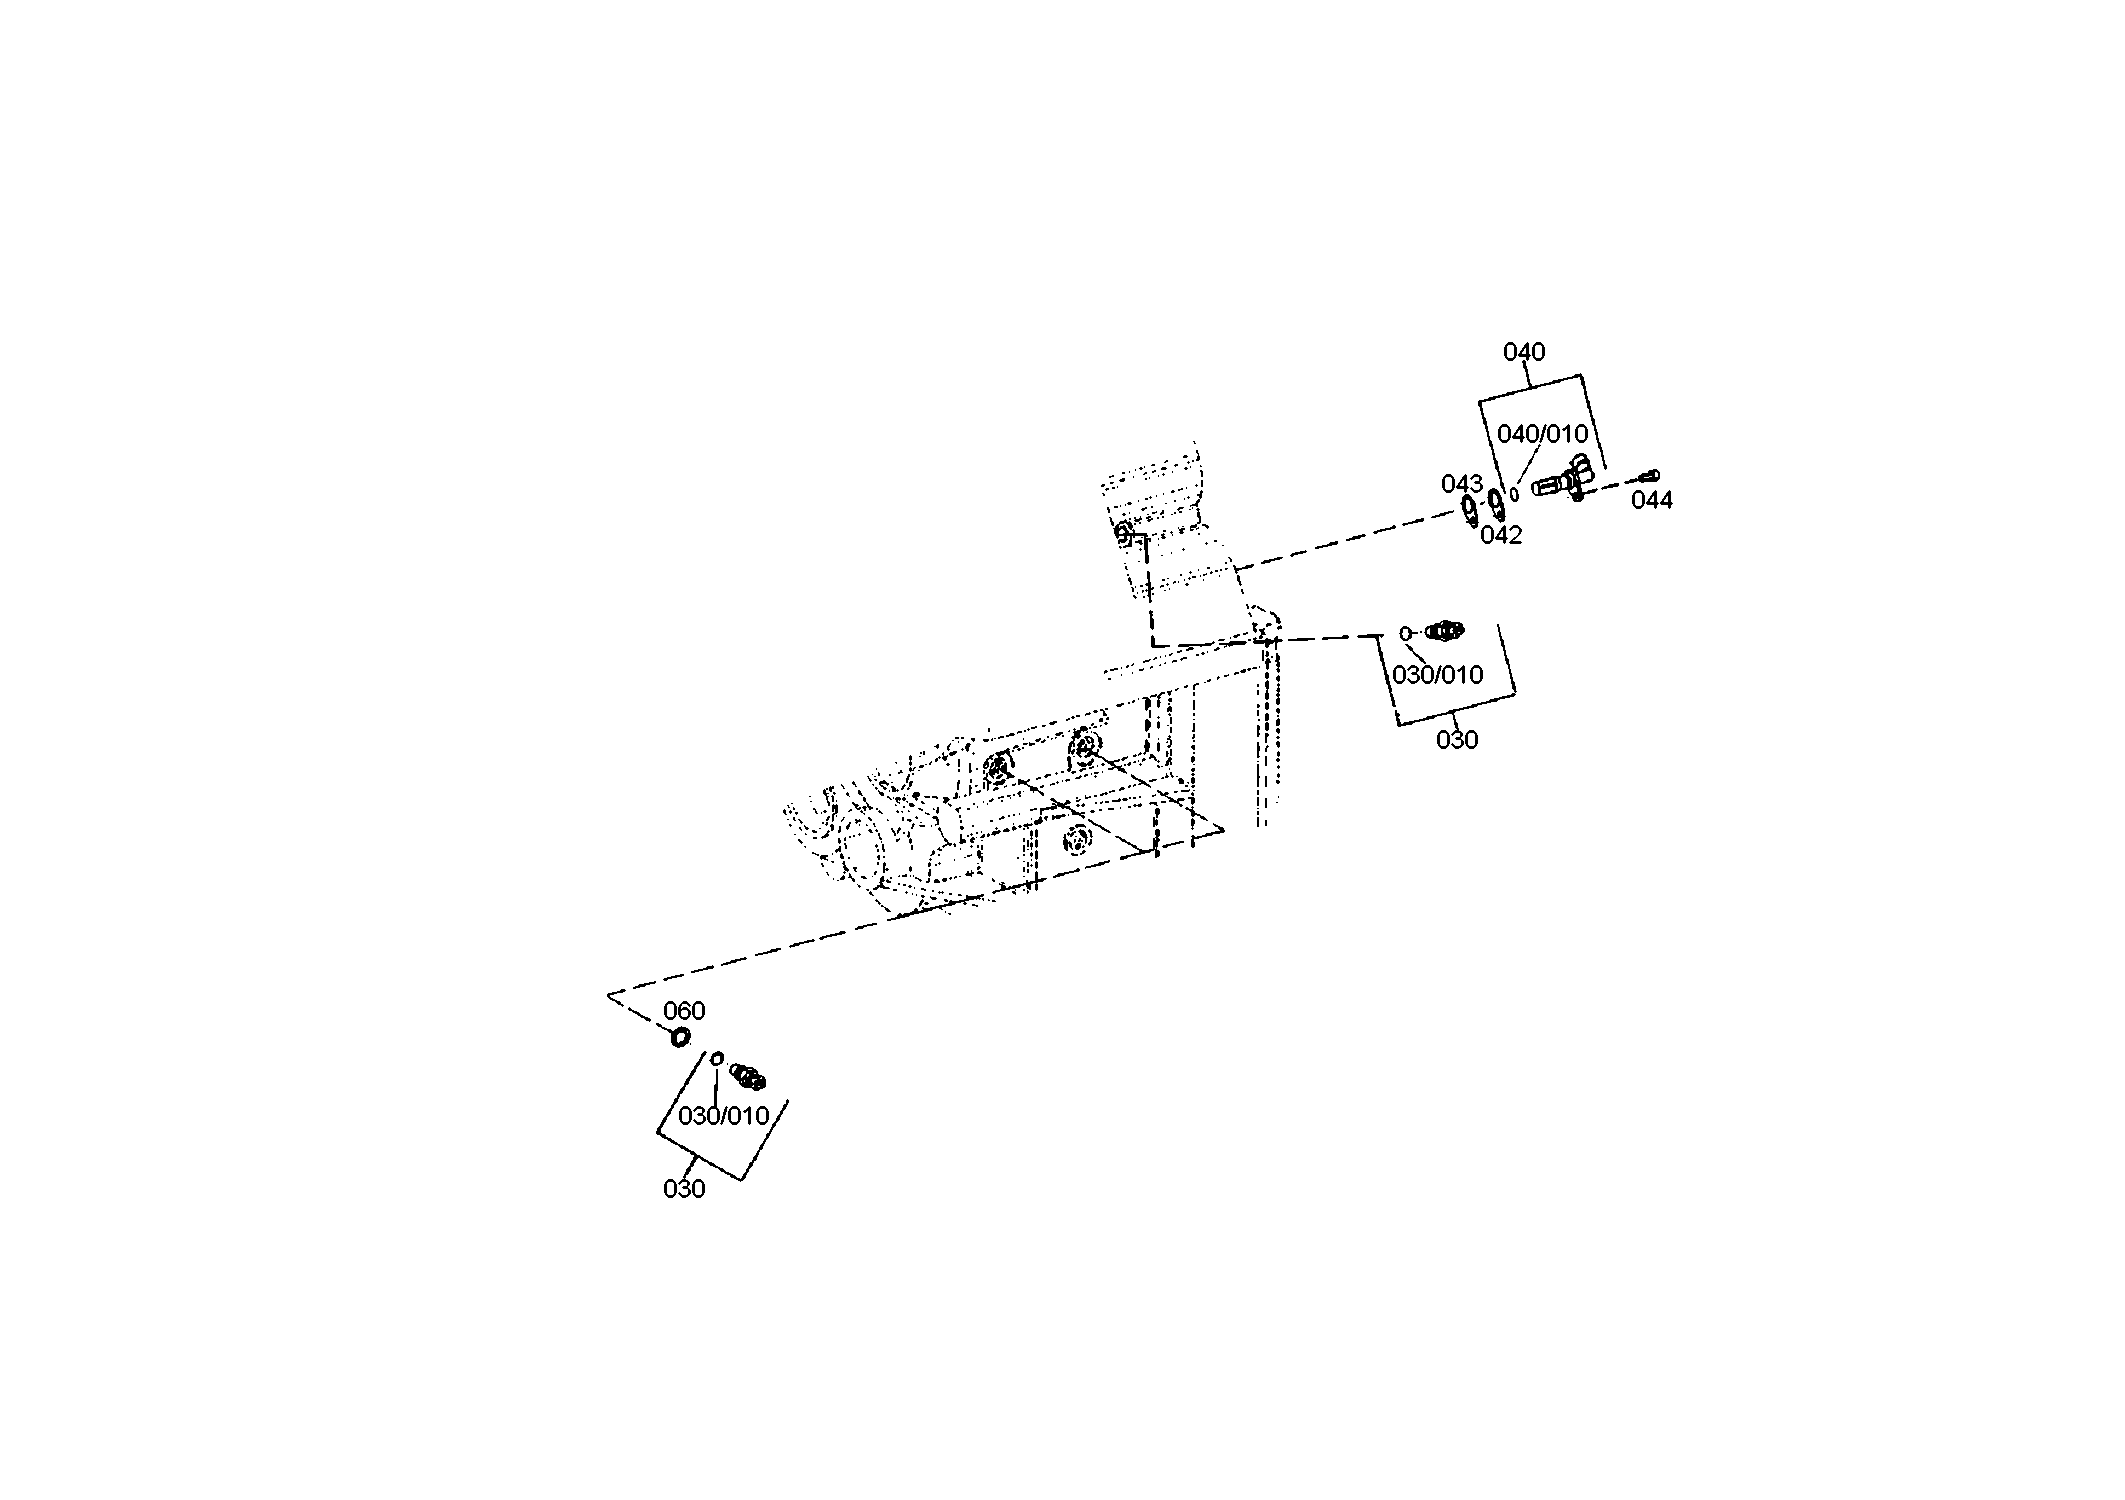 drawing for NACCO-IRV 4024299 - SPEED TRANSMITTER (figure 1)